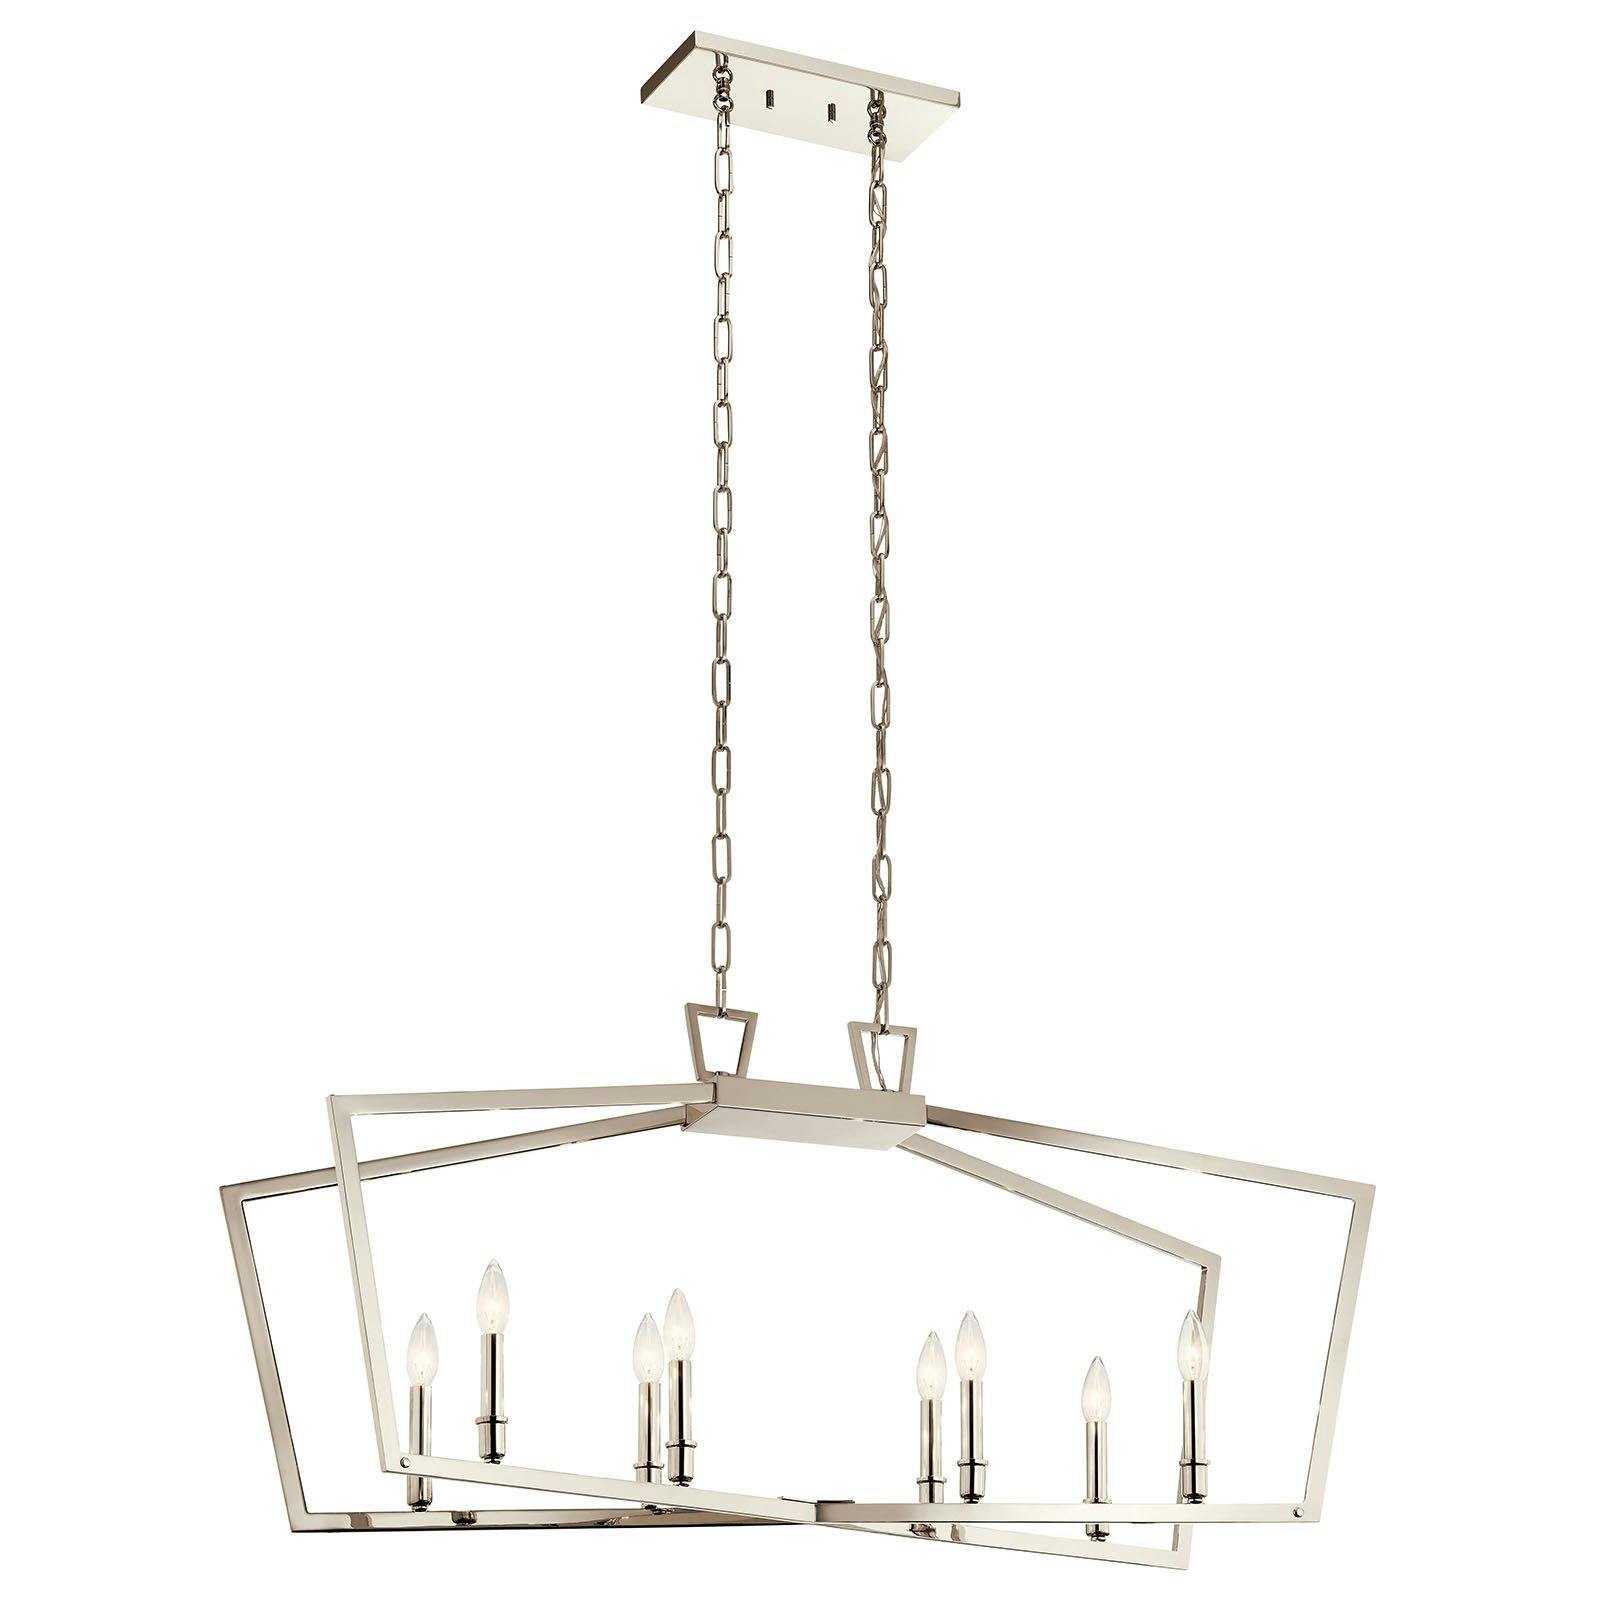 Abbotswell™ 8 Light Chandelier Nickel on a white background